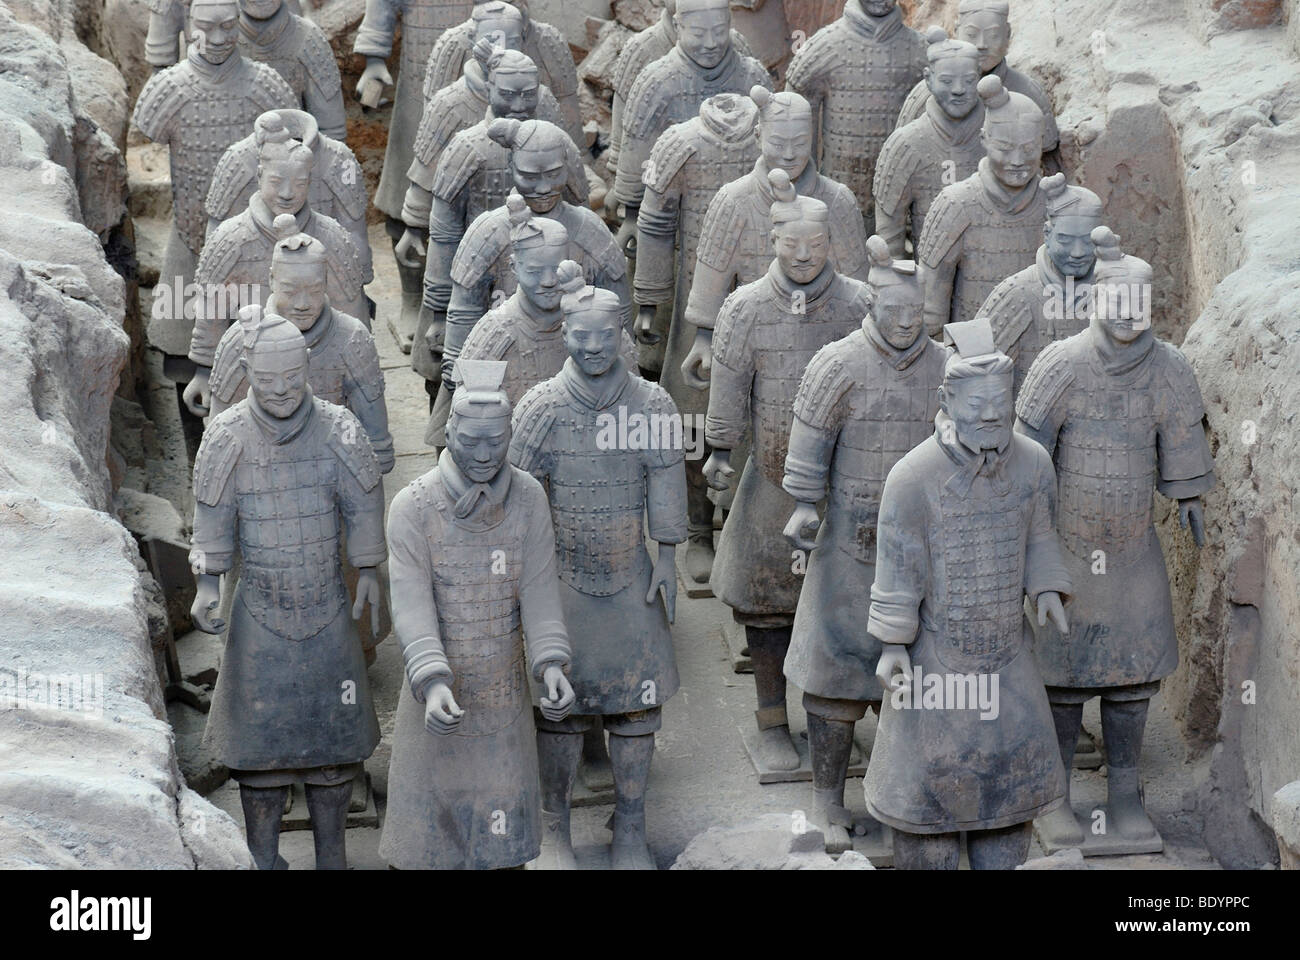 Terracotta army, part of the burial site, Hall 1, mausoleum of the 1st Emperor Qin Shihuangdi in Xi'an, Shaanxi Province, China Stock Photo